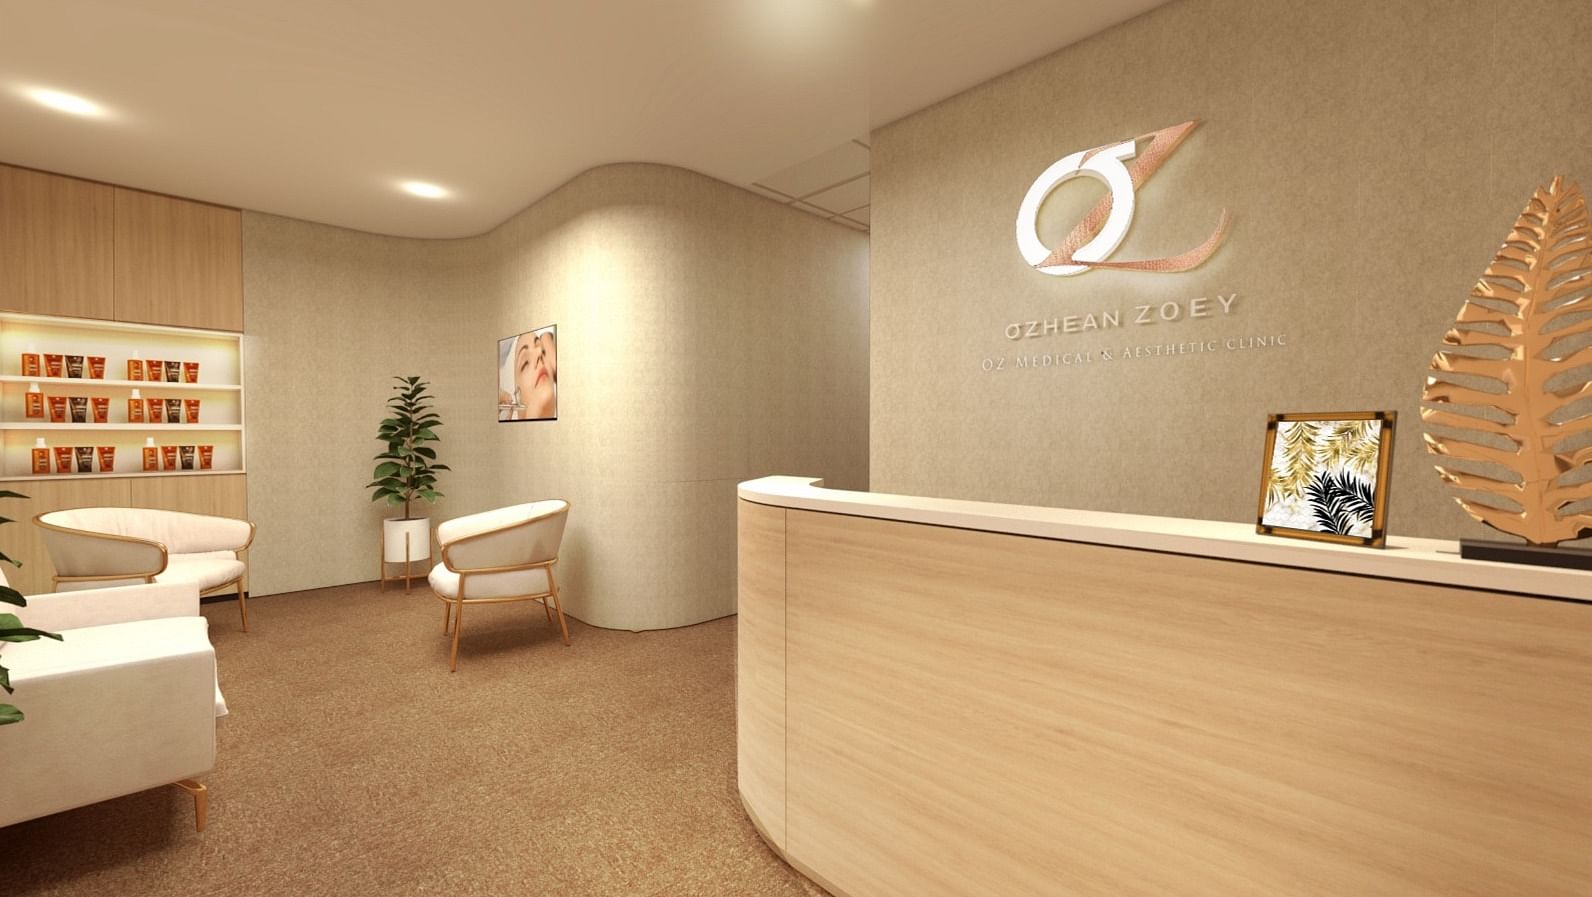 Ozhean Zoey Medical & Aesthetic Clinic